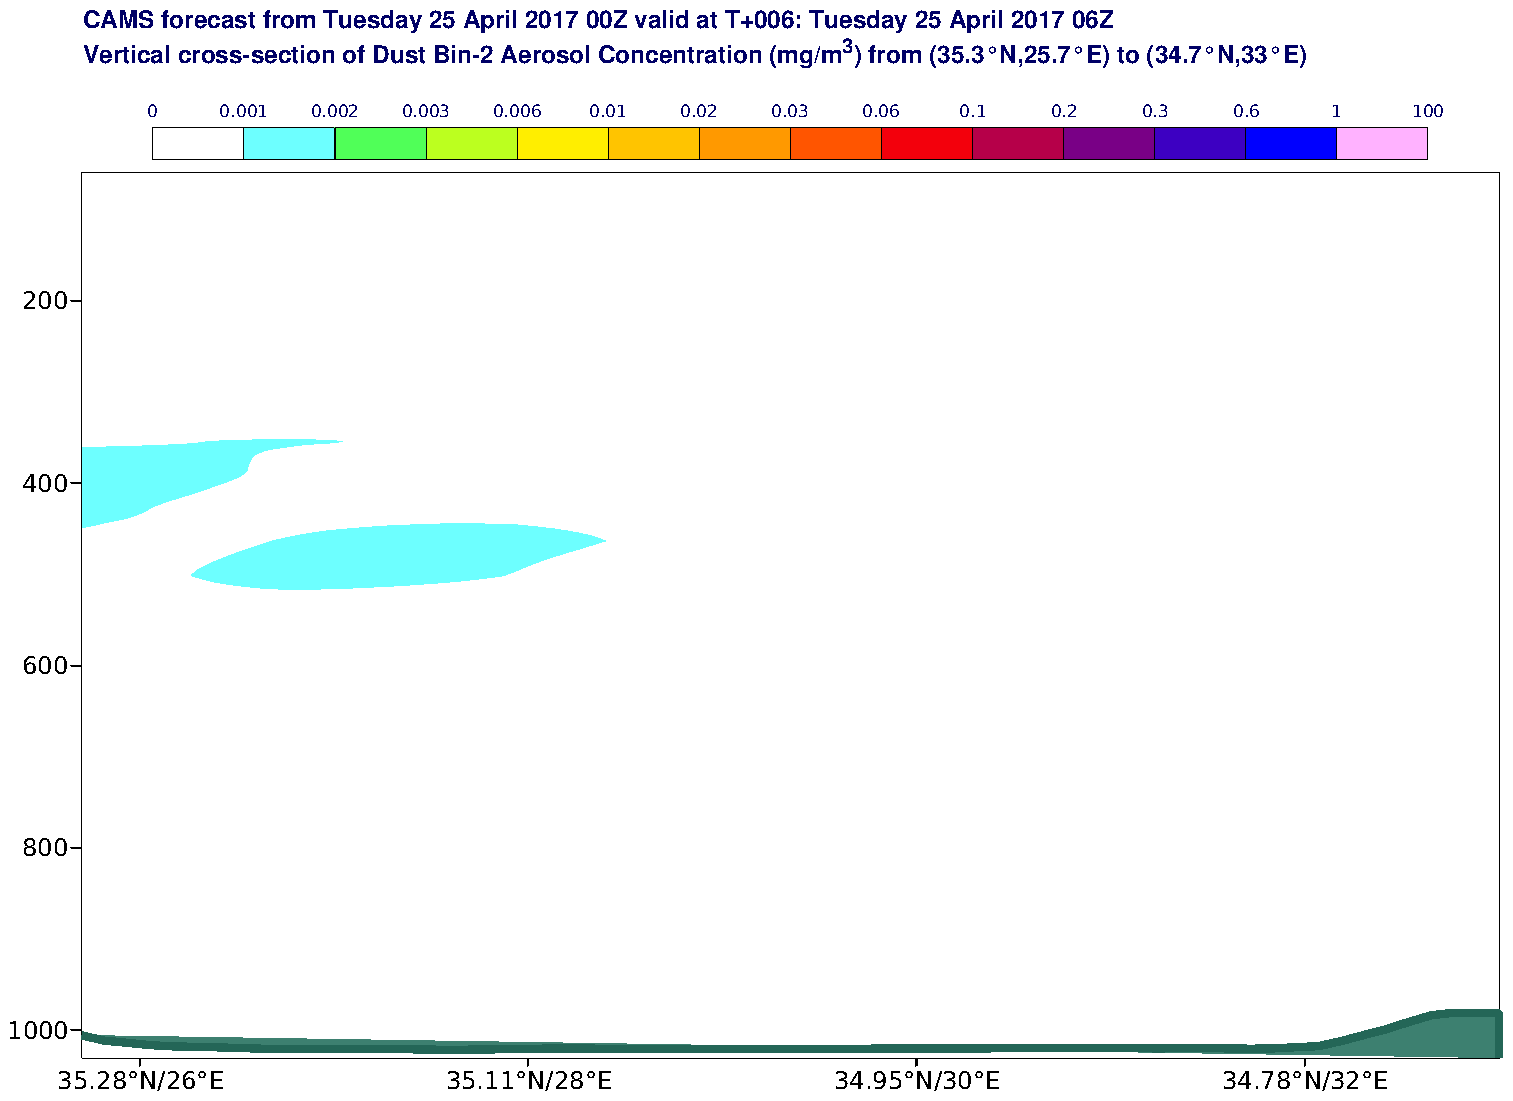 Vertical cross-section of Dust Bin-2 Aerosol Concentration (mg/m3) valid at T6 - 2017-04-25 06:00